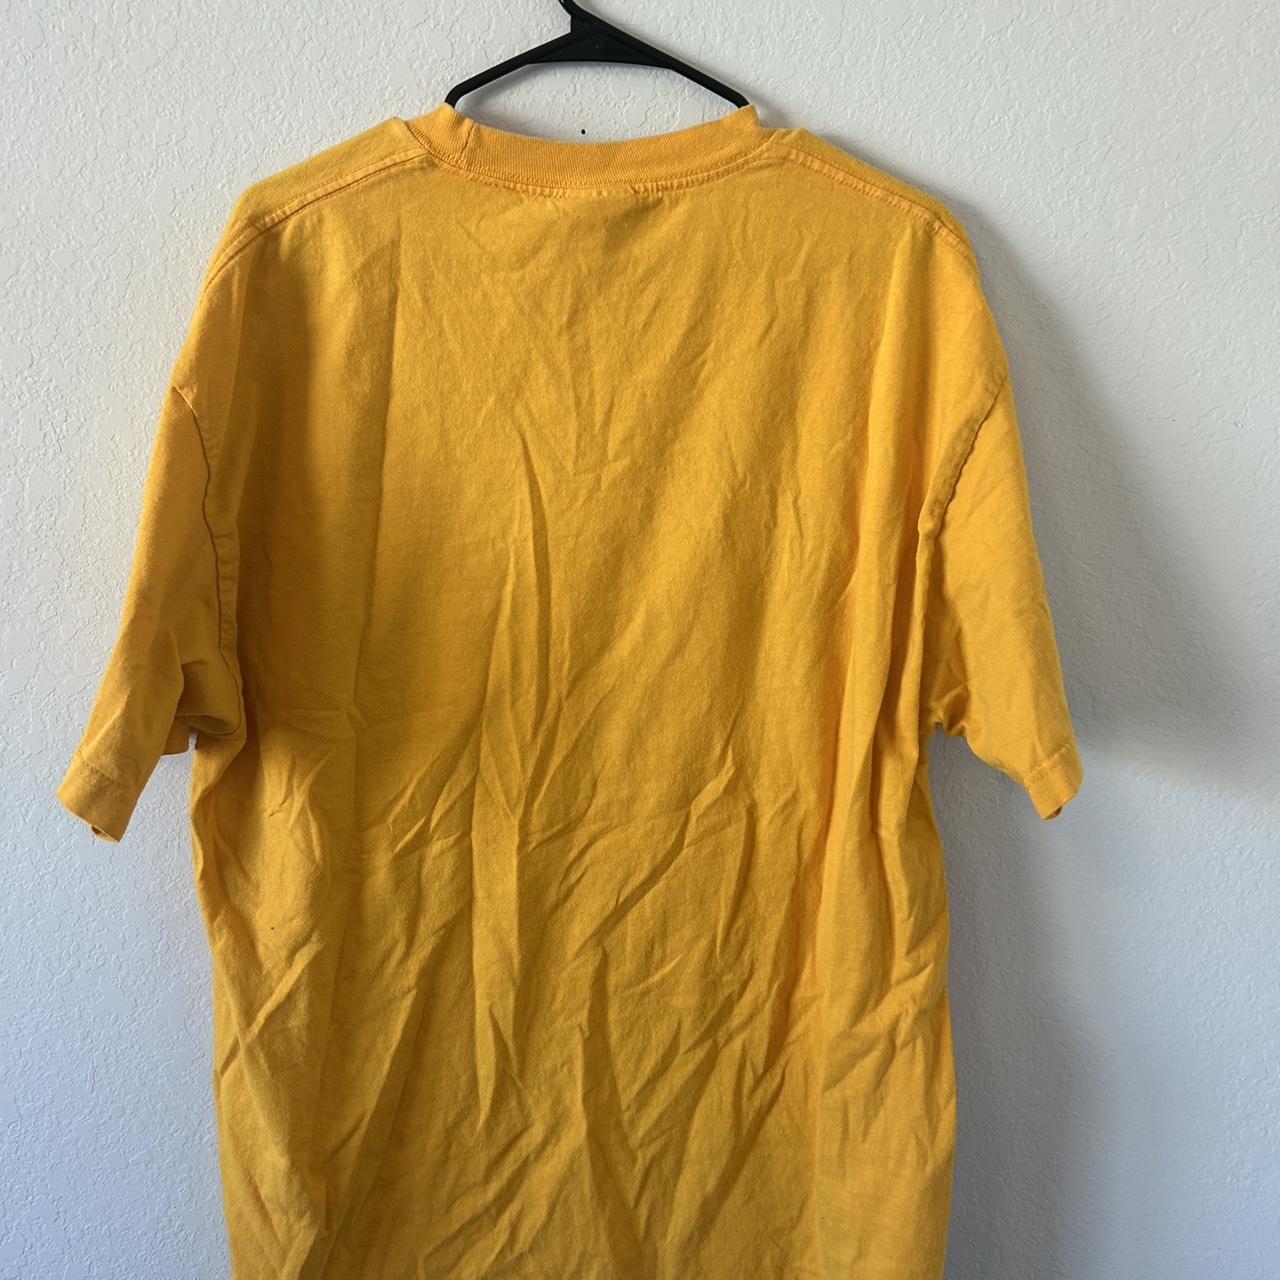 Vintage March madness tee shirt 2011 Size XL - Depop